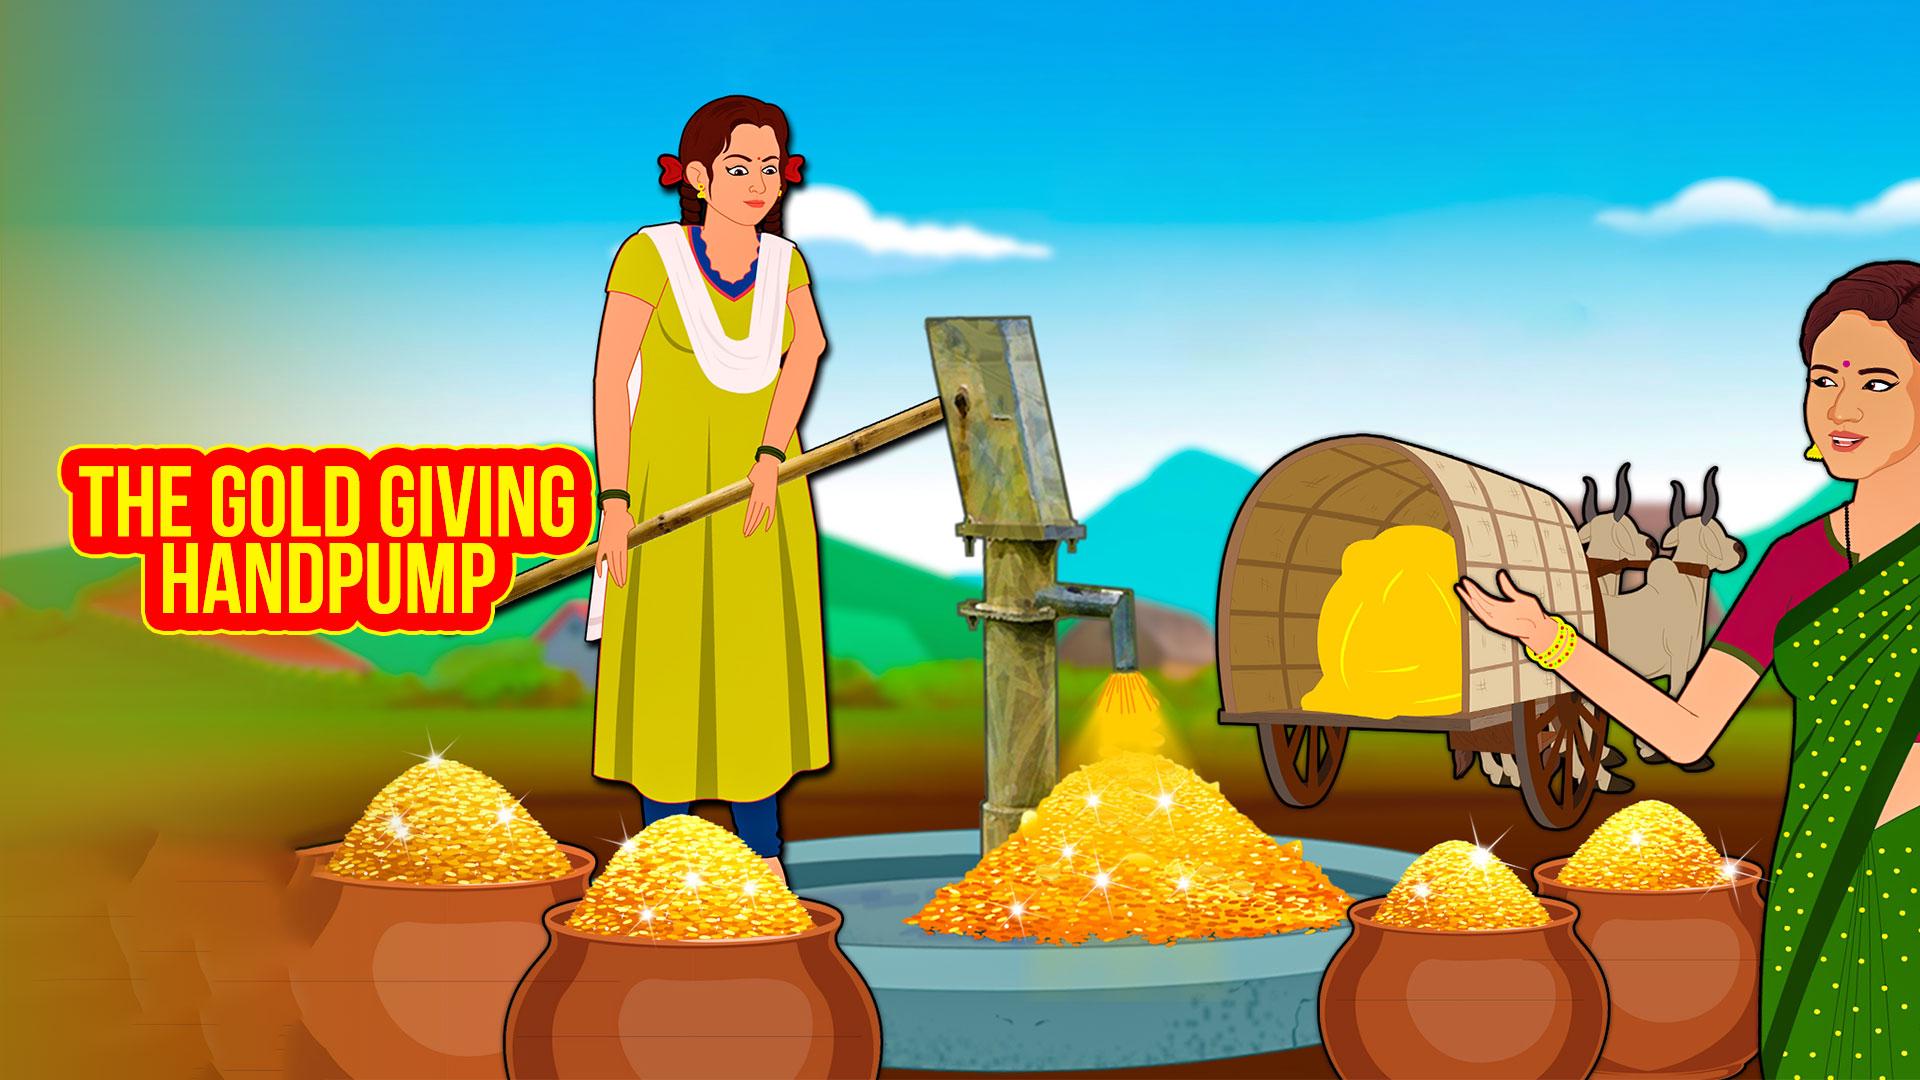 Watch The Gold Giving Hand Pump Kids Movie Online in 2022